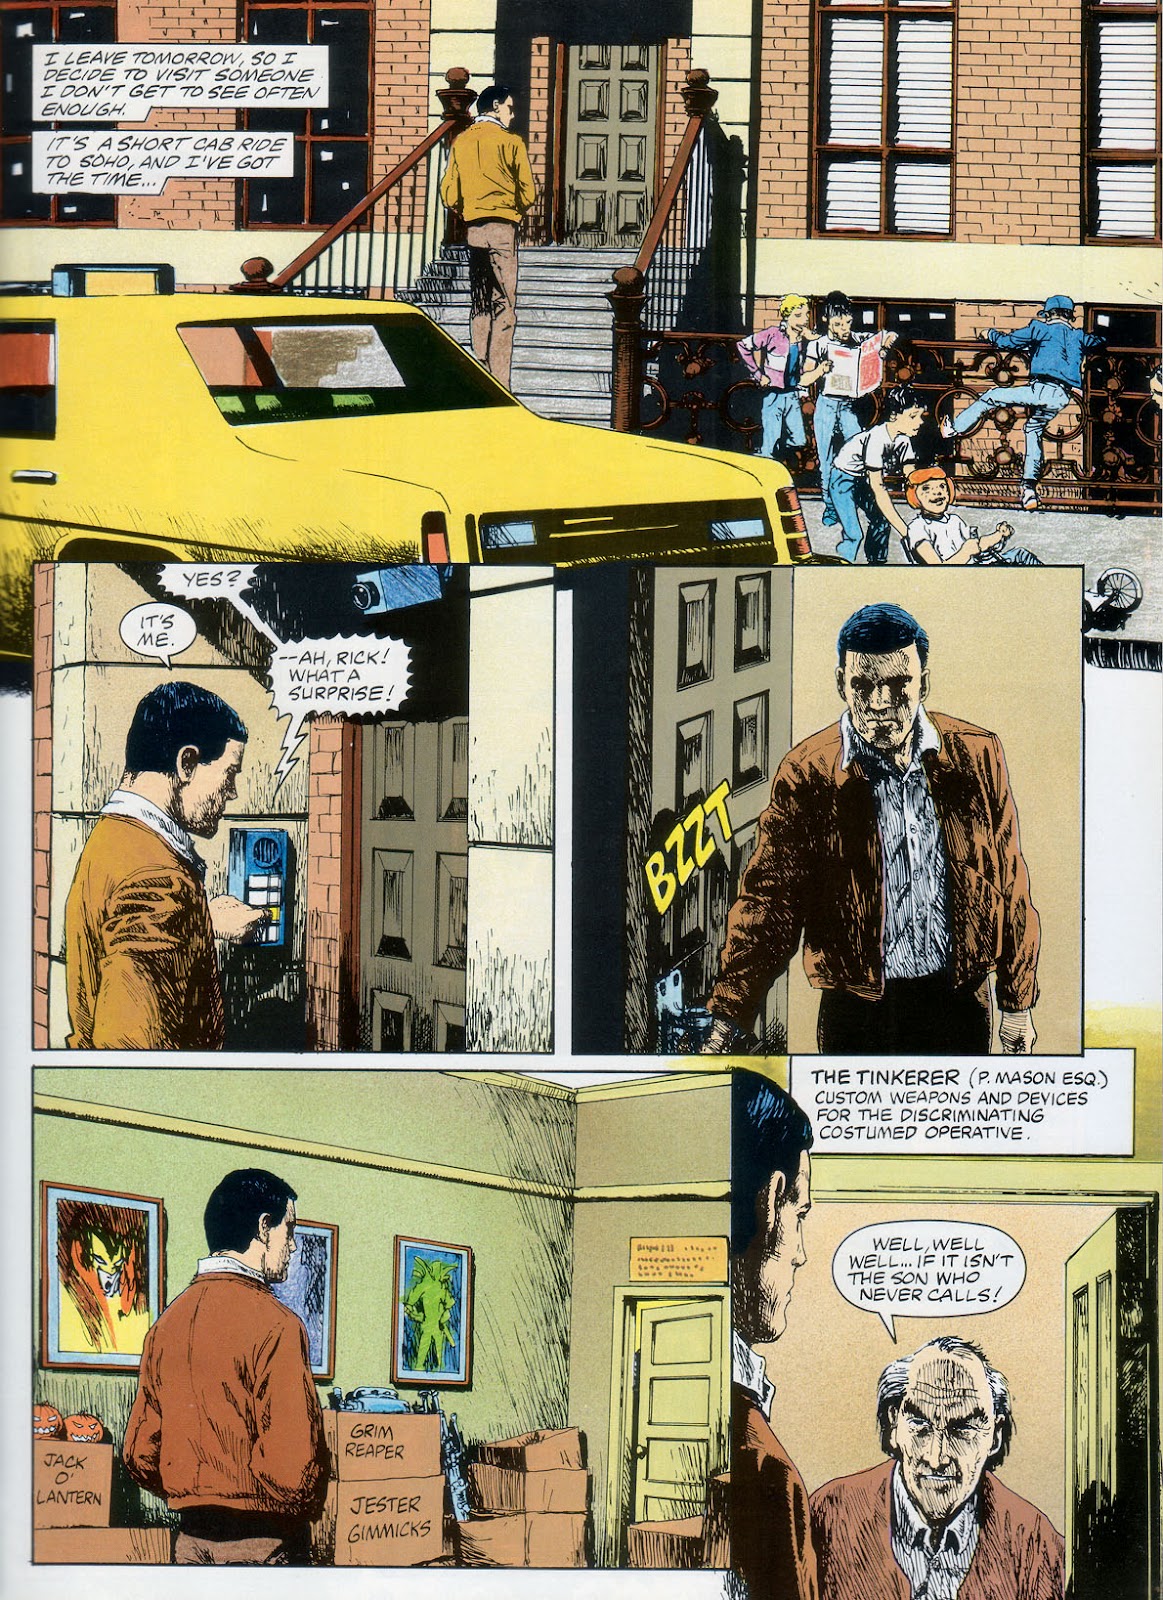 Marvel Graphic Novel issue 57 - Rick Mason - The Agent - Page 31